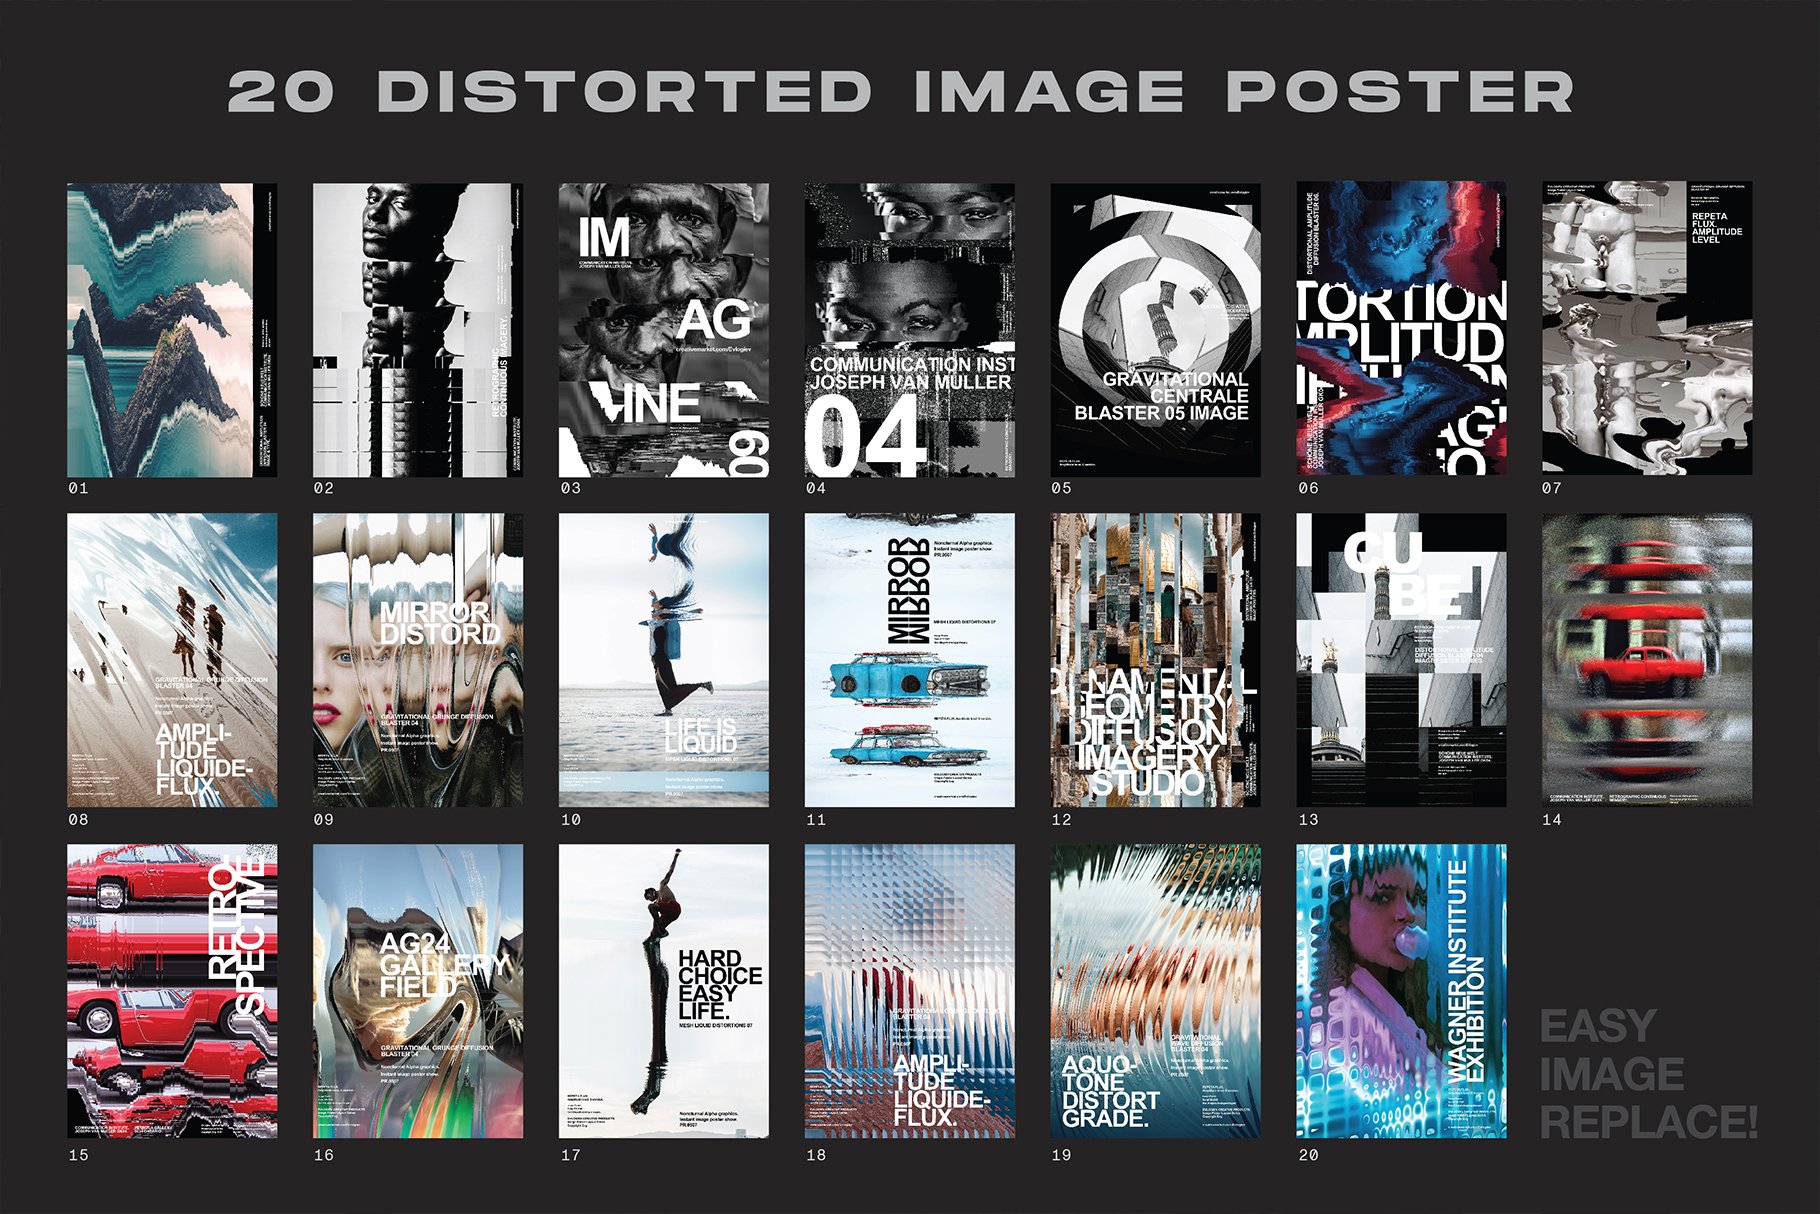 Distorted Image Posterspreview image.